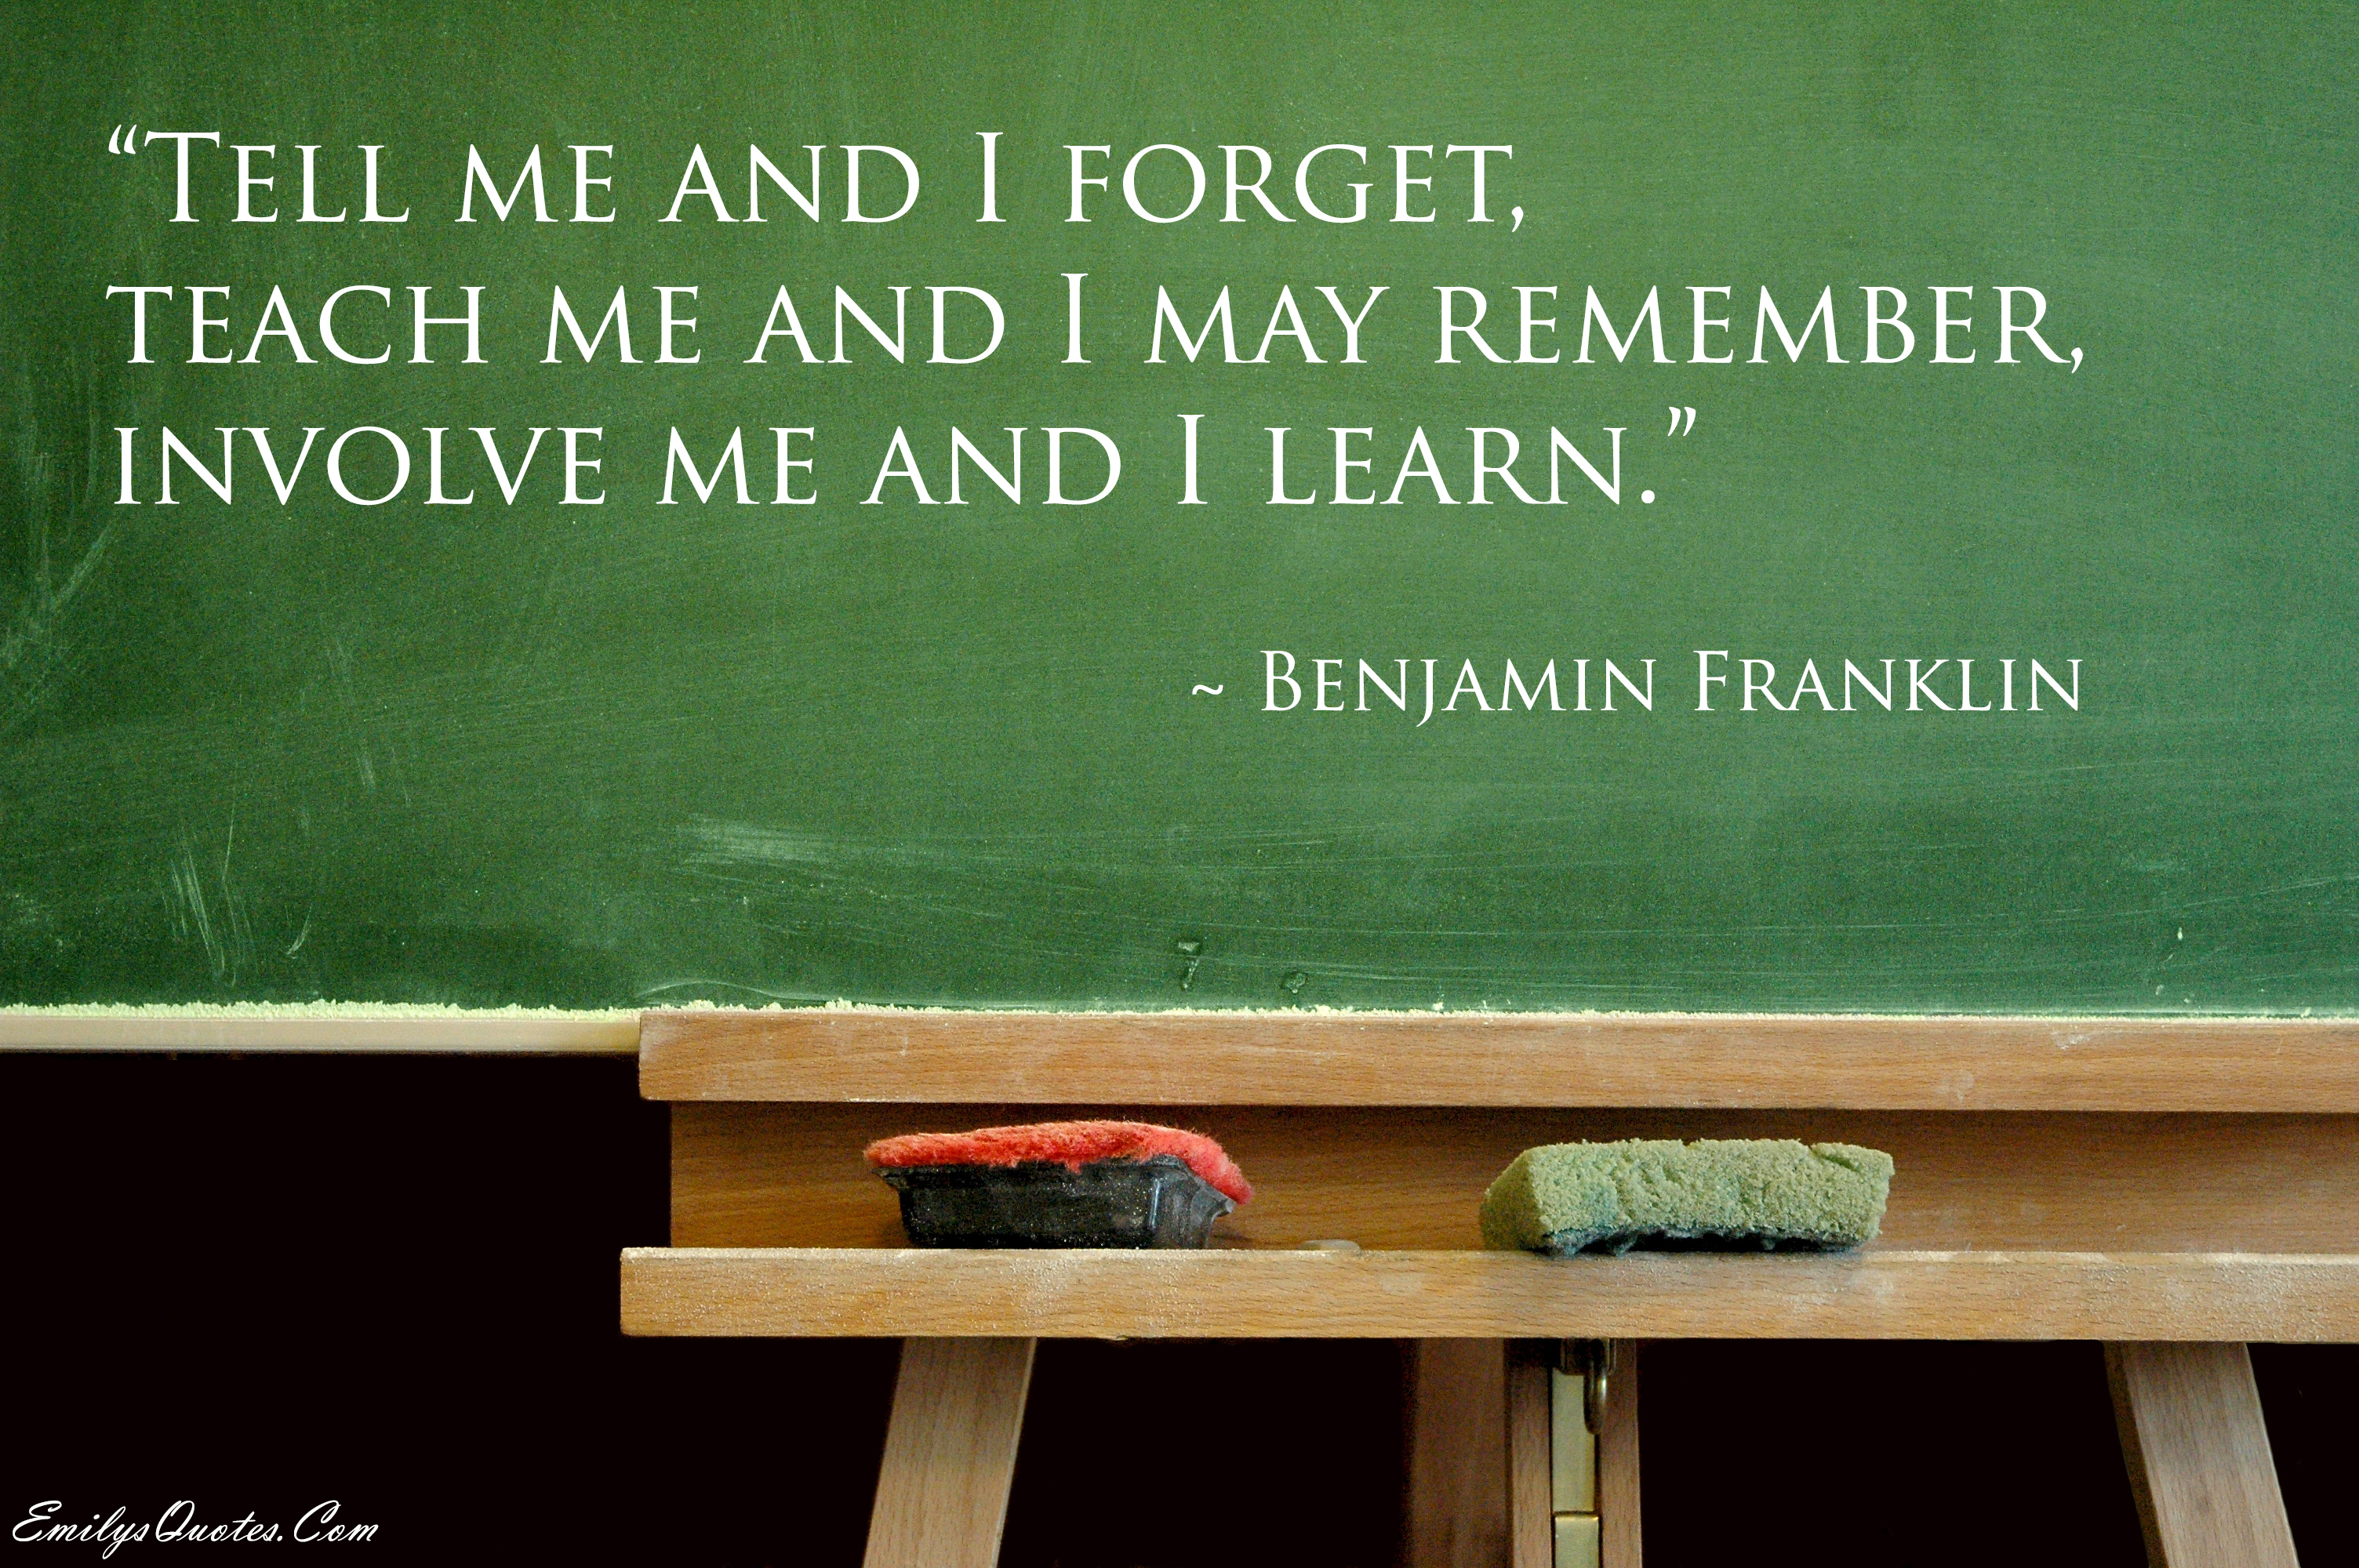 Tell me and I forget, teach me and I may remember, involve me and I learn